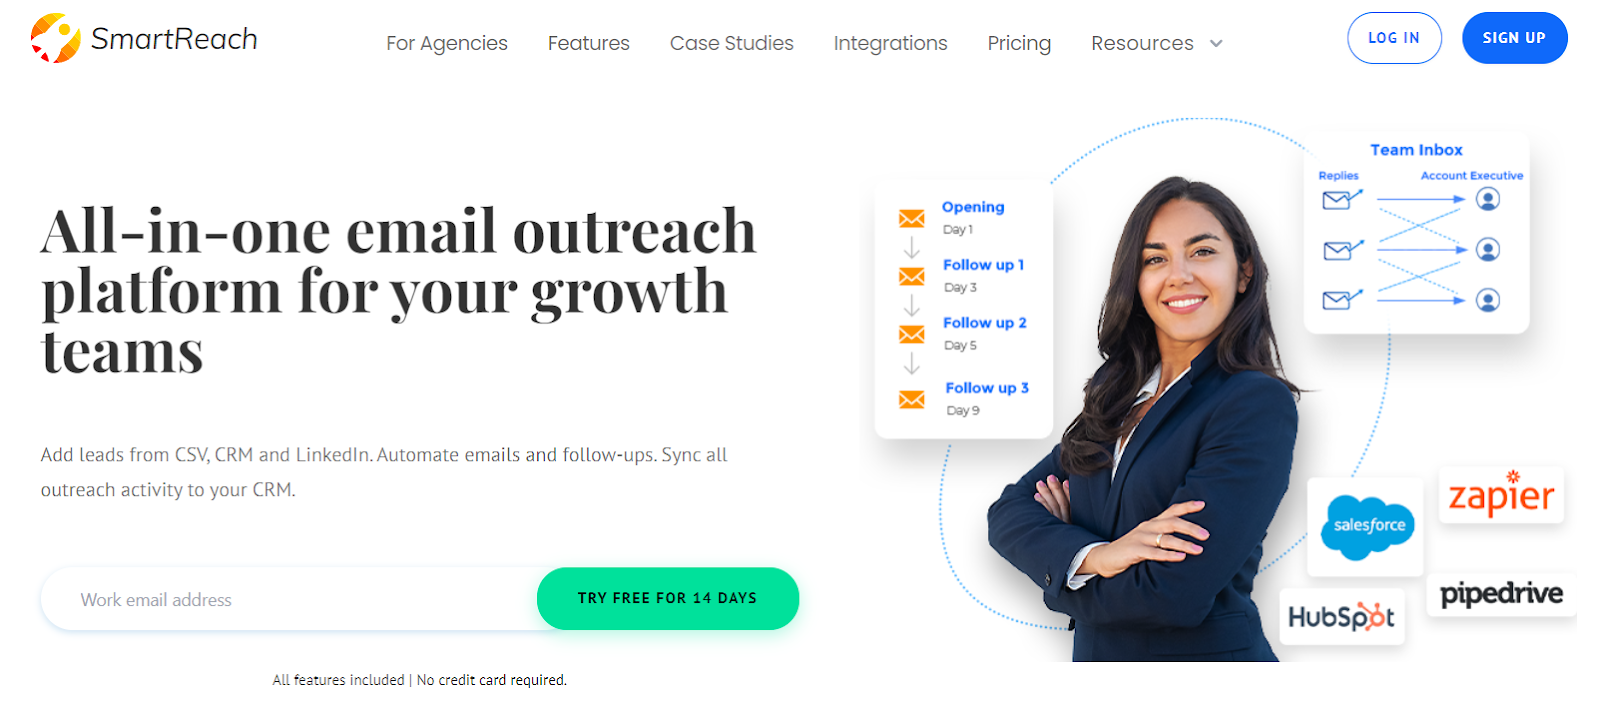 SmartReach is one of the top email marketing platforms.